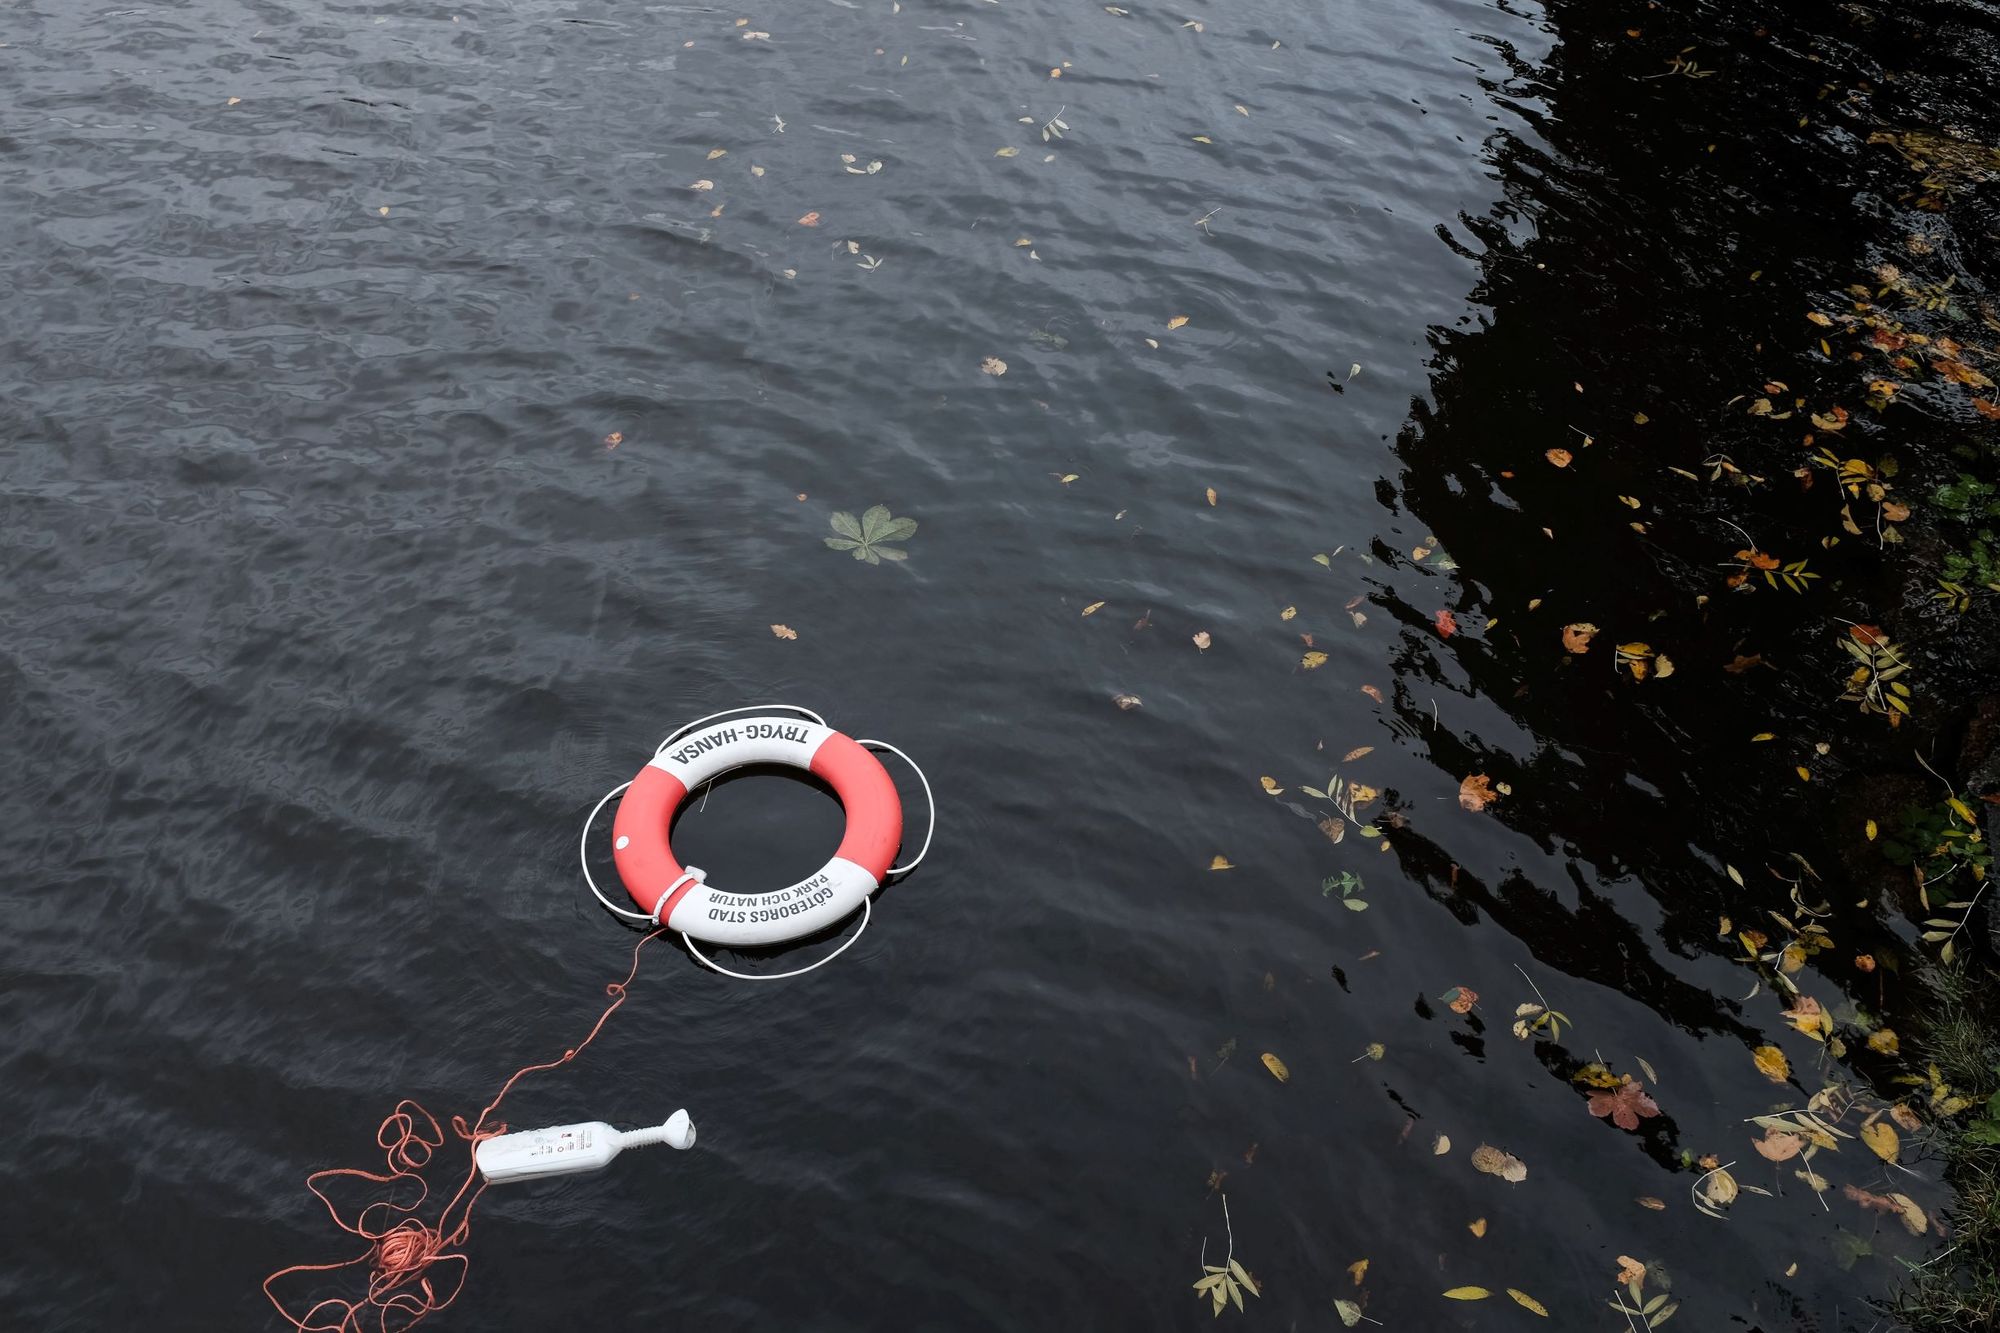 Photo of a life preserver in water